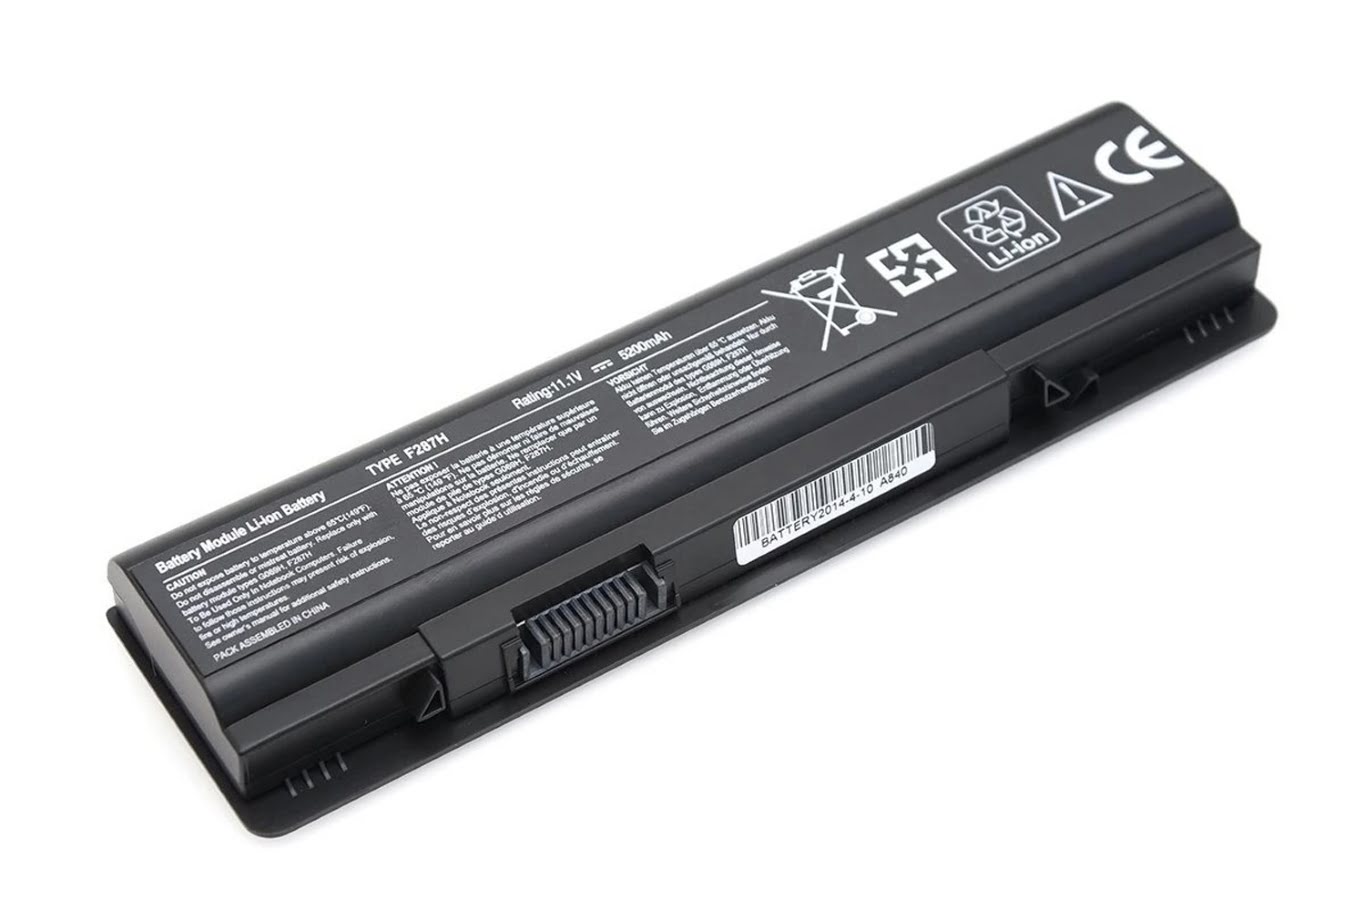 Dell 0f286h, 312-0818 Laptop Battery For Inspiron 1410, Vostro 1014 replacement